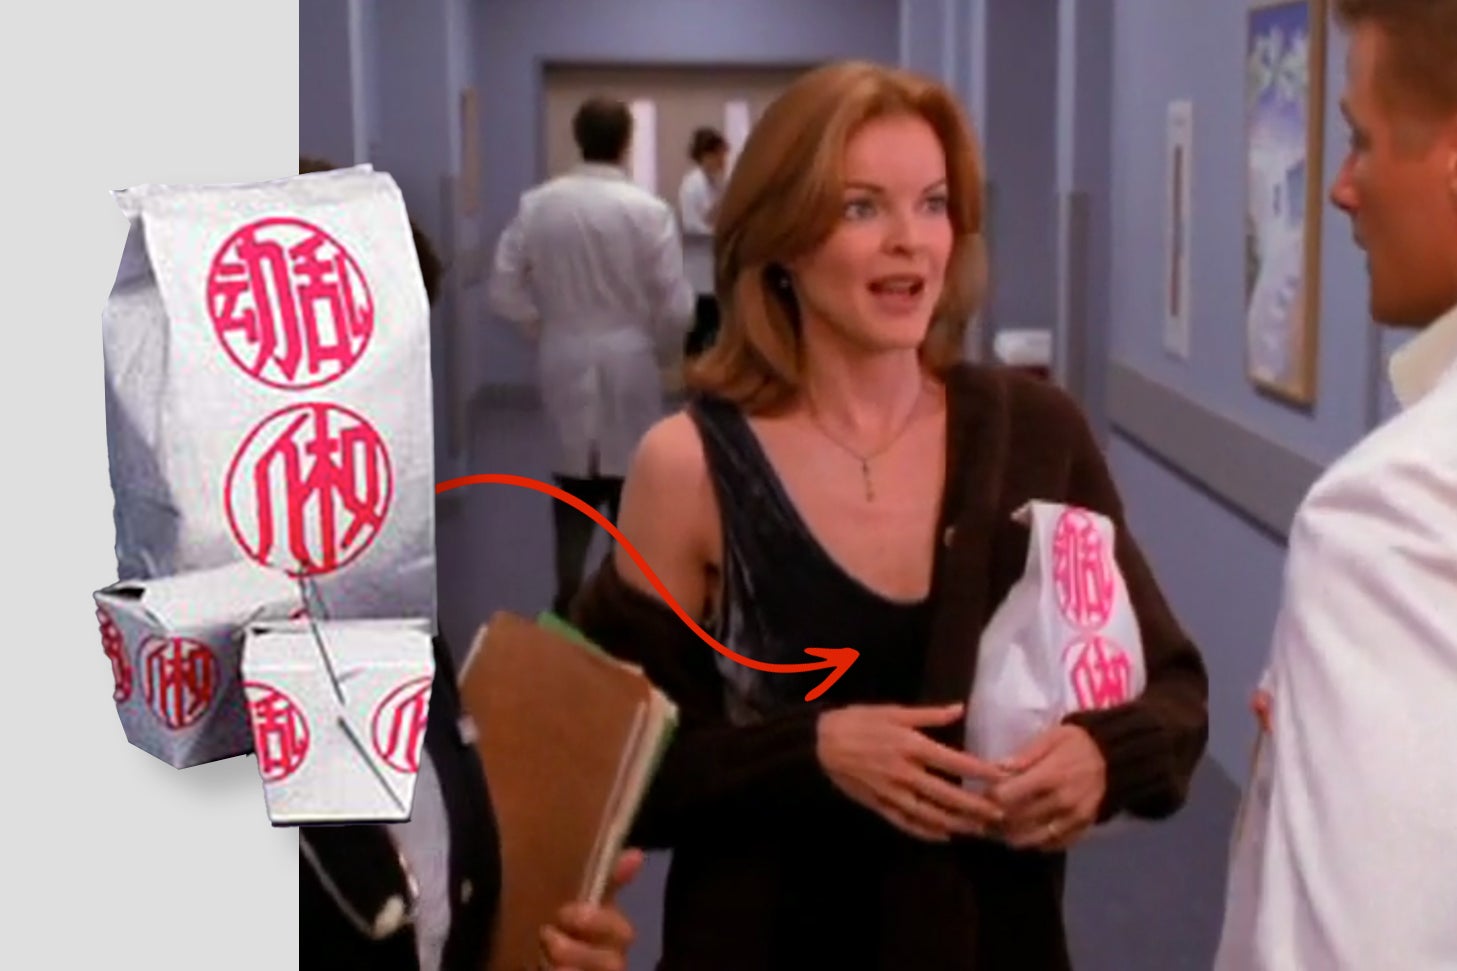 A woman on a TV show holds several Chinese takeout bags with prominent red lettering on them.